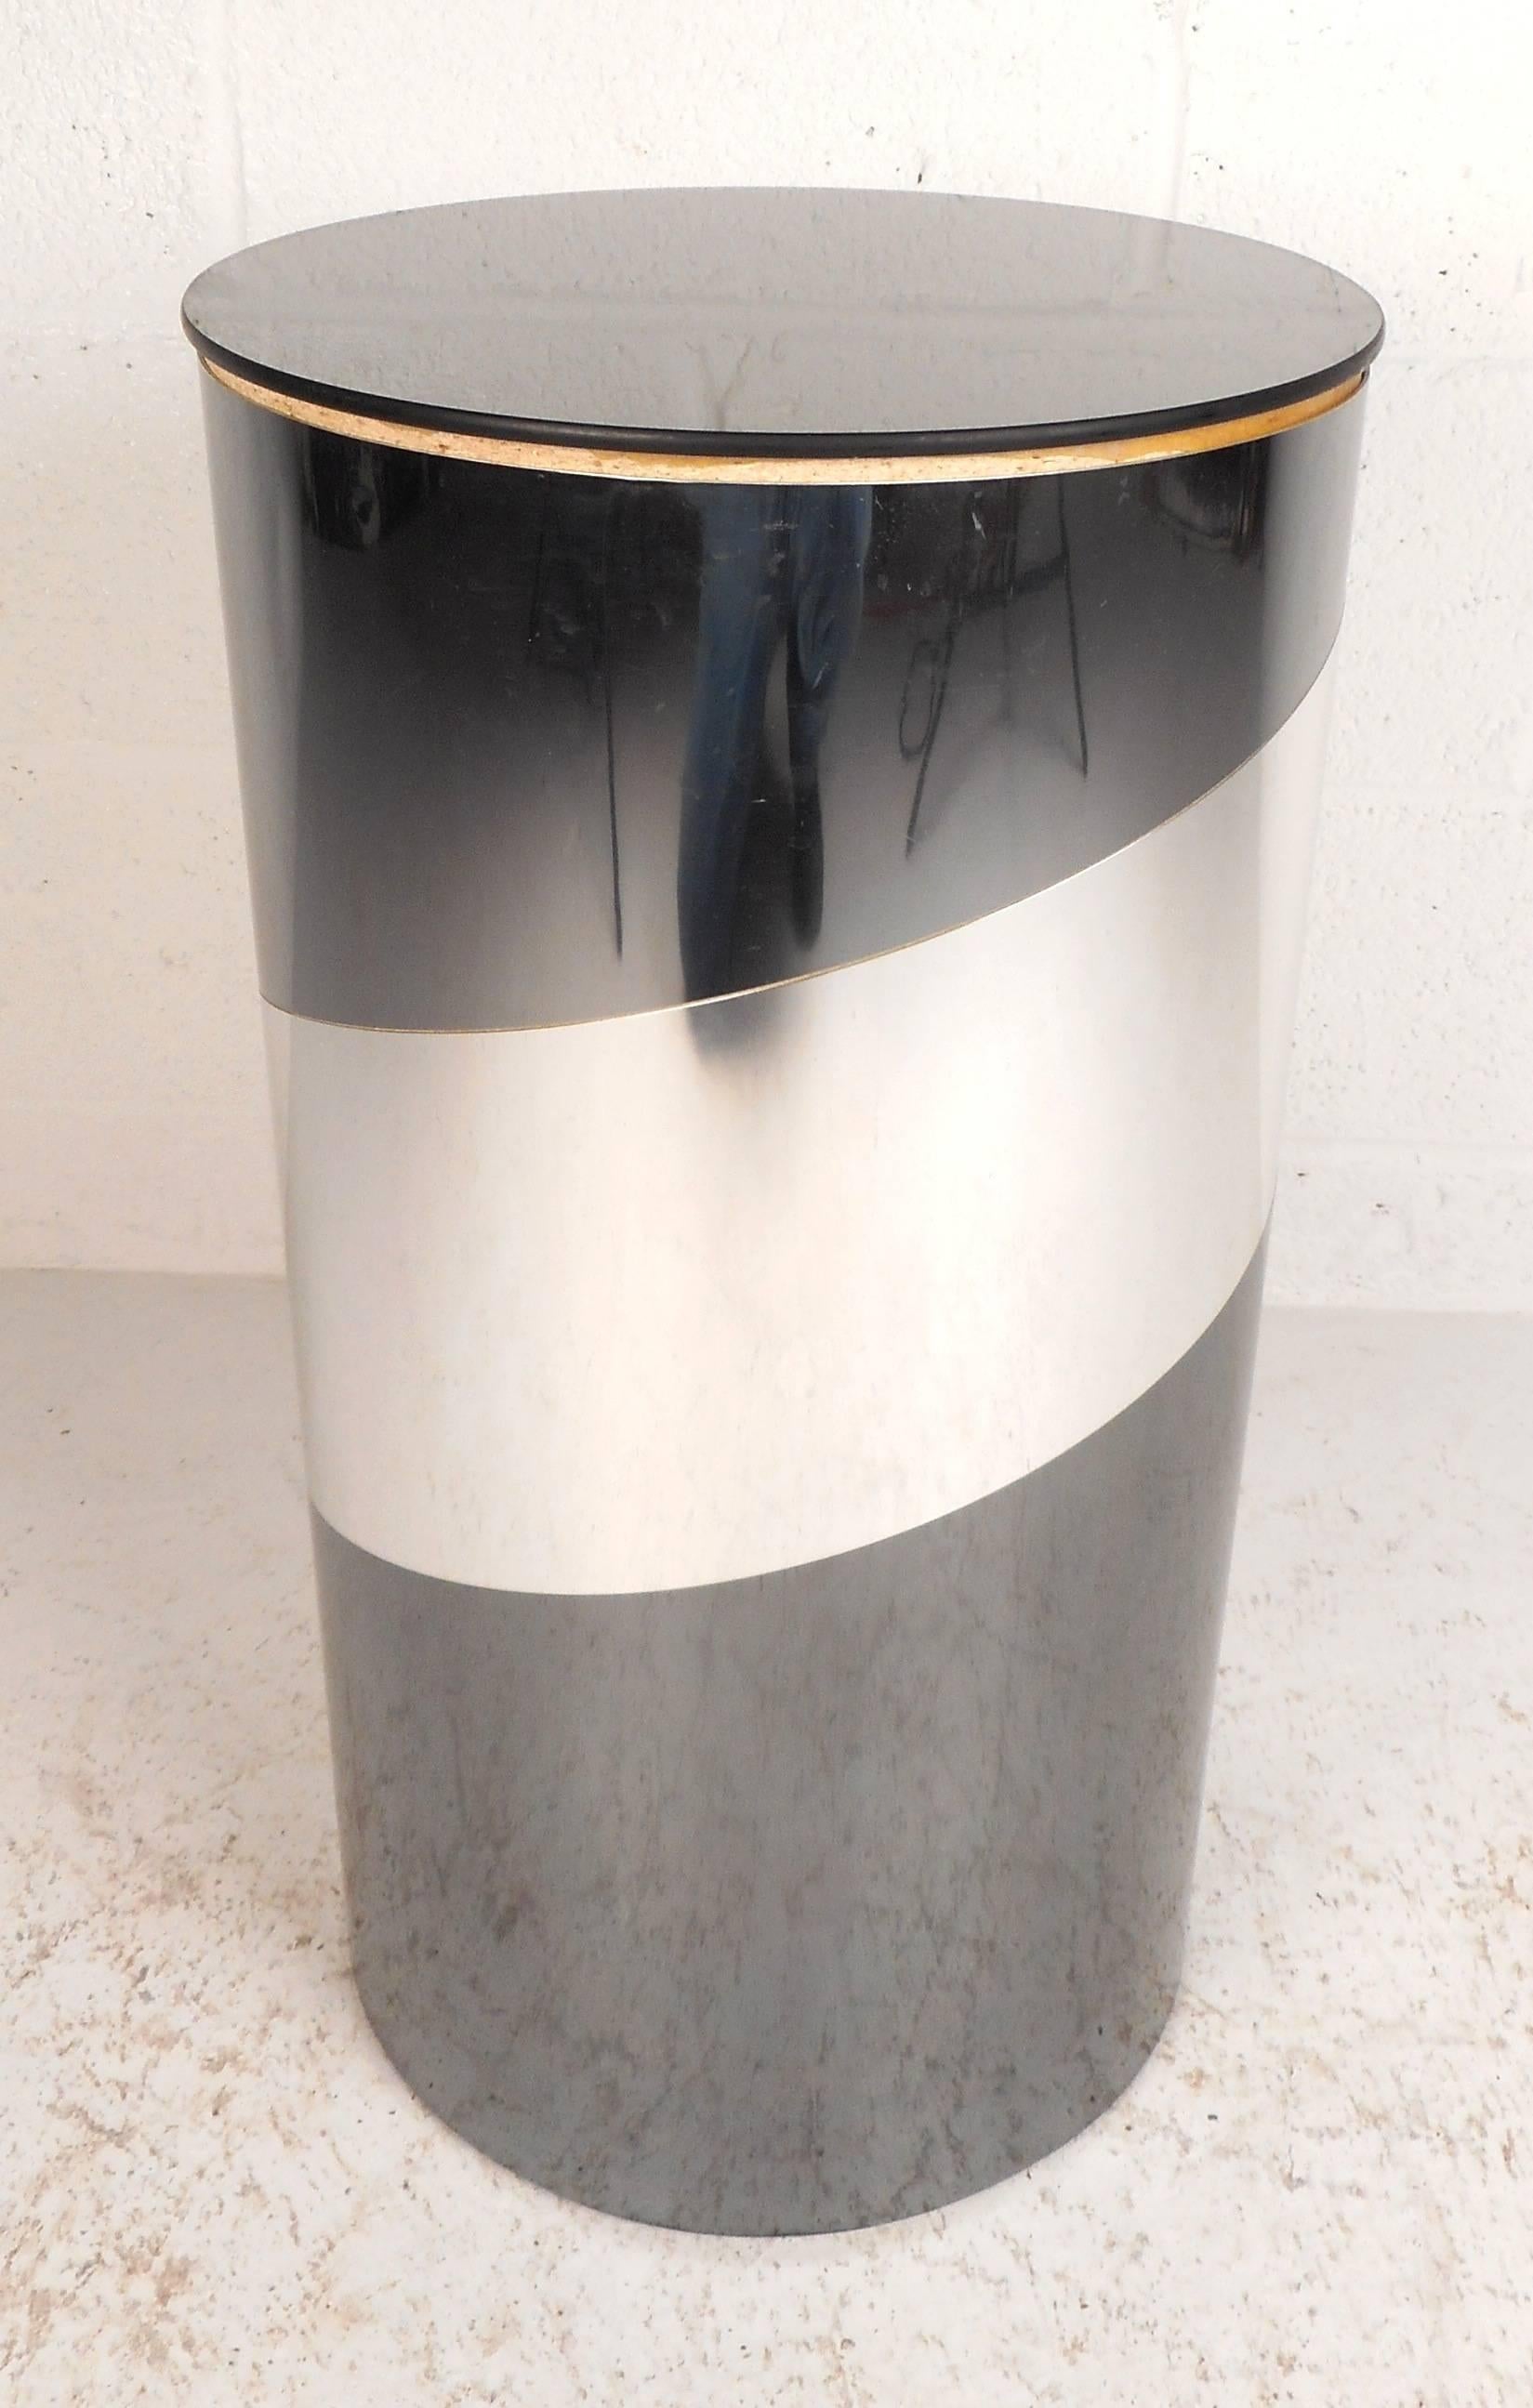 Stunning vintage modern pedestal features a cylinder shape layered with chrome strips and a mirrored top. Unique design can be used for a side table or a decorative piece. The Classic retro appearance makes it the perfect addition to any modern